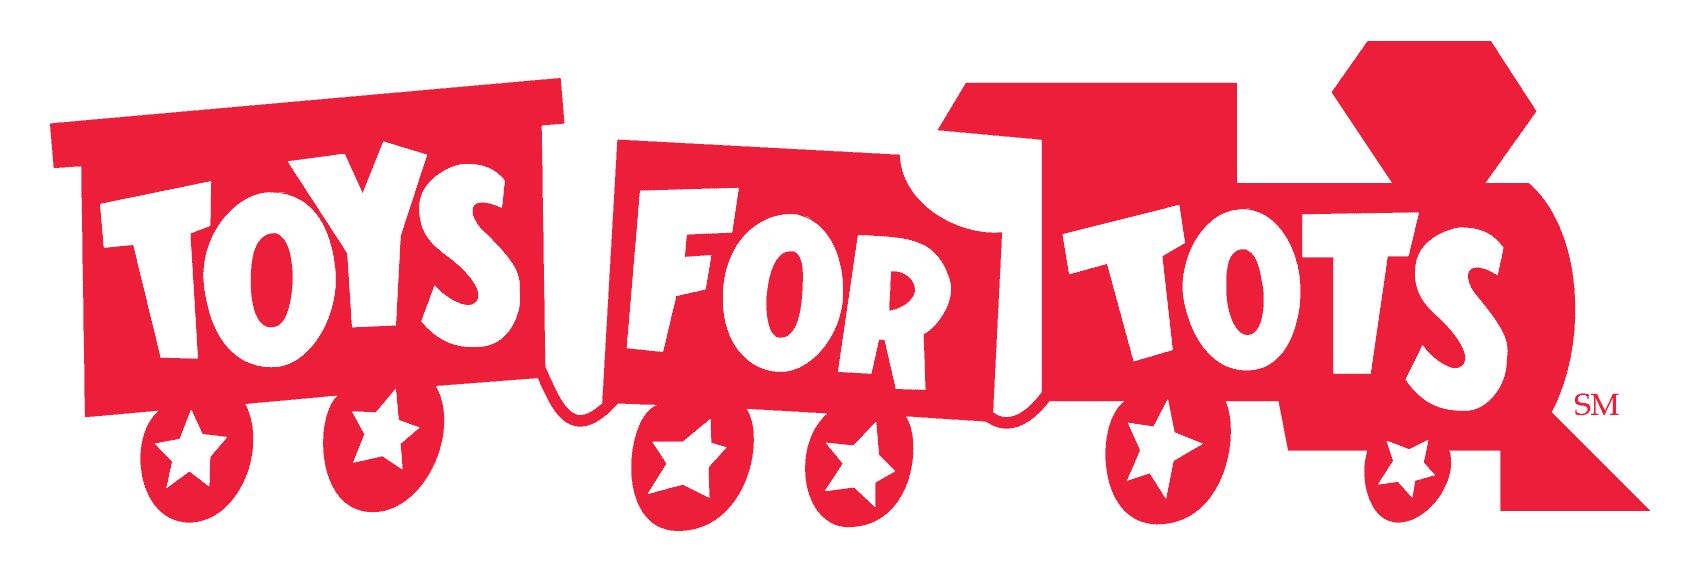 10-facts-about-toys-for-tots